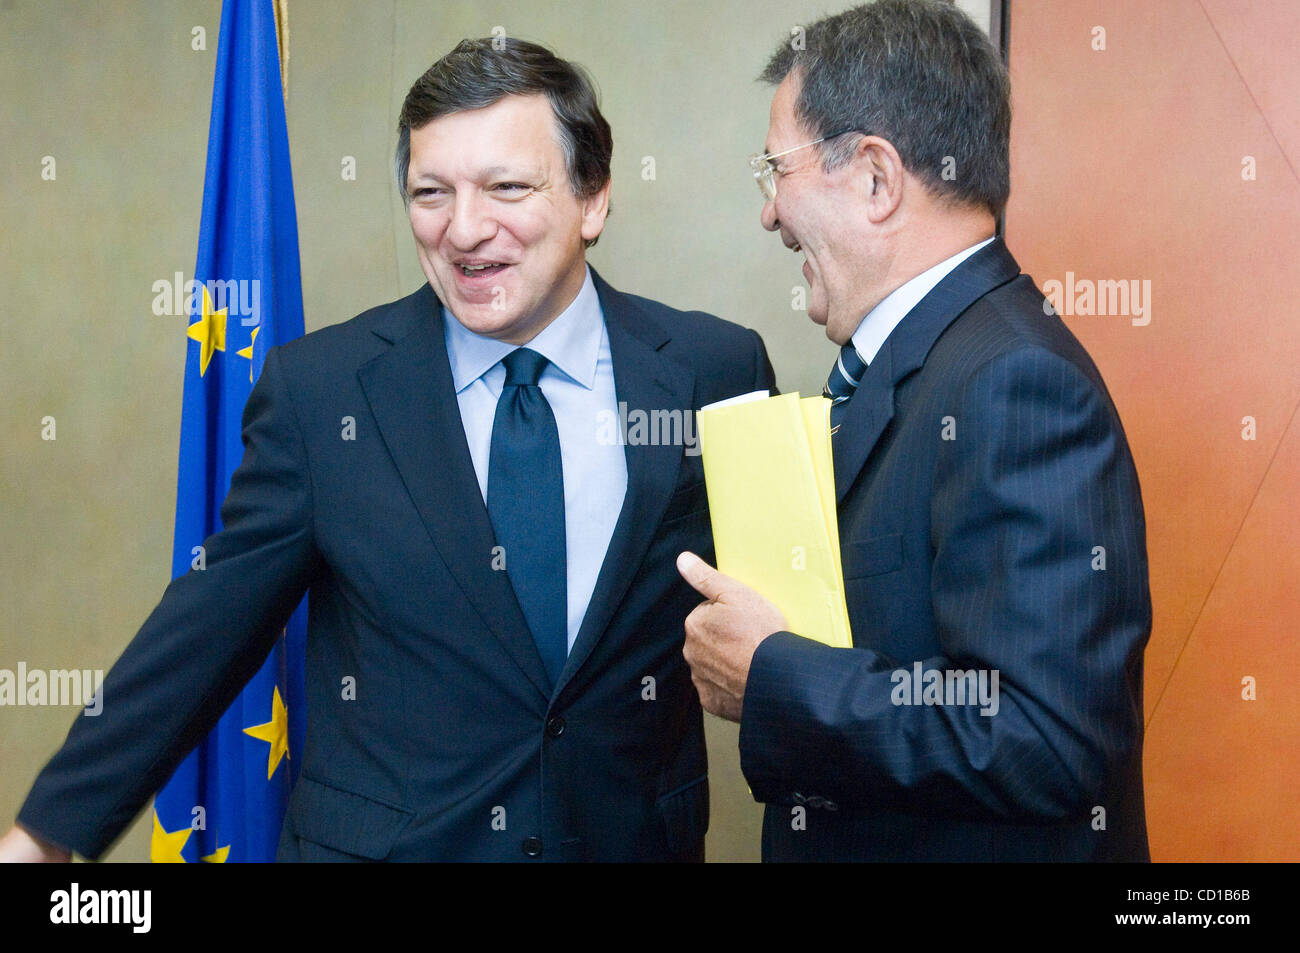 European Commission President Jose Manuel Barroso (L) welcomes former Italian Prime Minister Romano Prodi now chairman of the joint UN/African Union panel on support for African peacekeeping operations prior to a lunch meeting at the EU commission headquarters in Brussels 30 September 2008. UN Secre Stock Photo